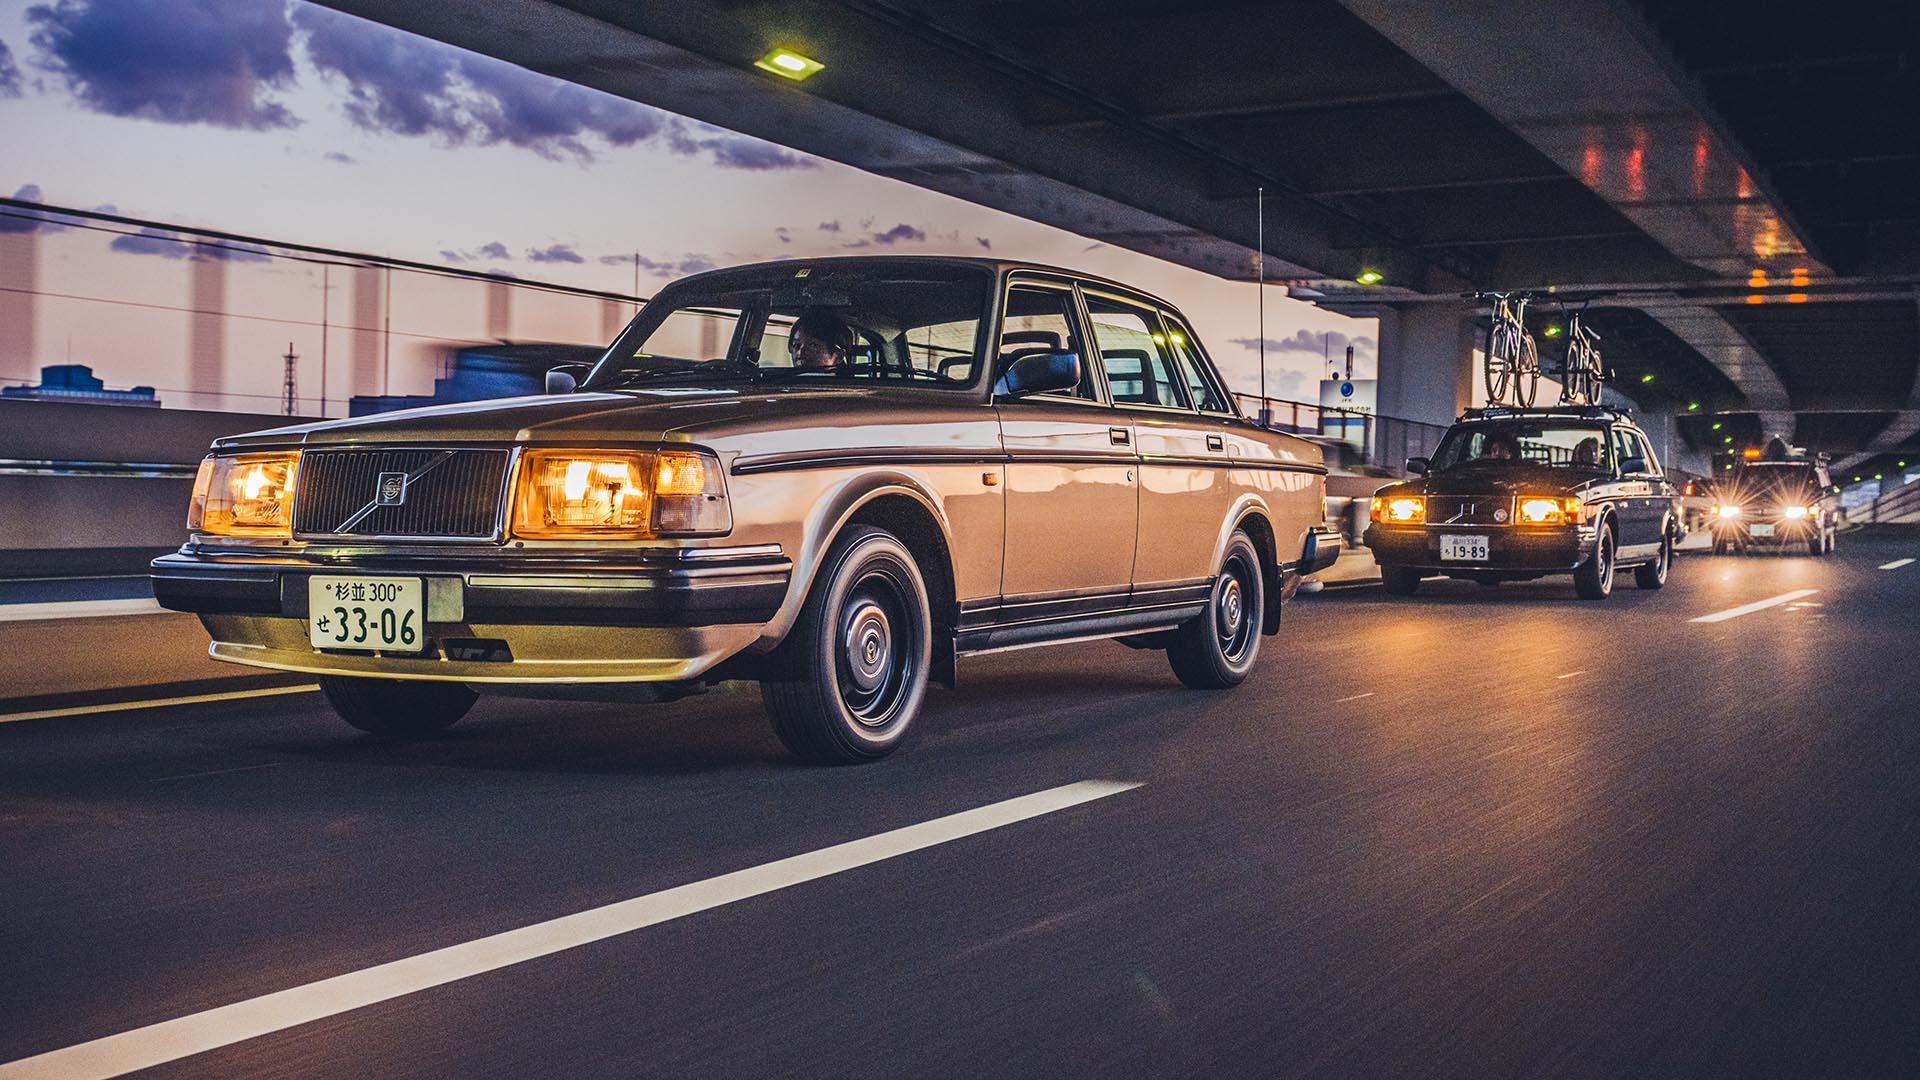 Top Gear Magazine 224 content: old Volvos in Japan